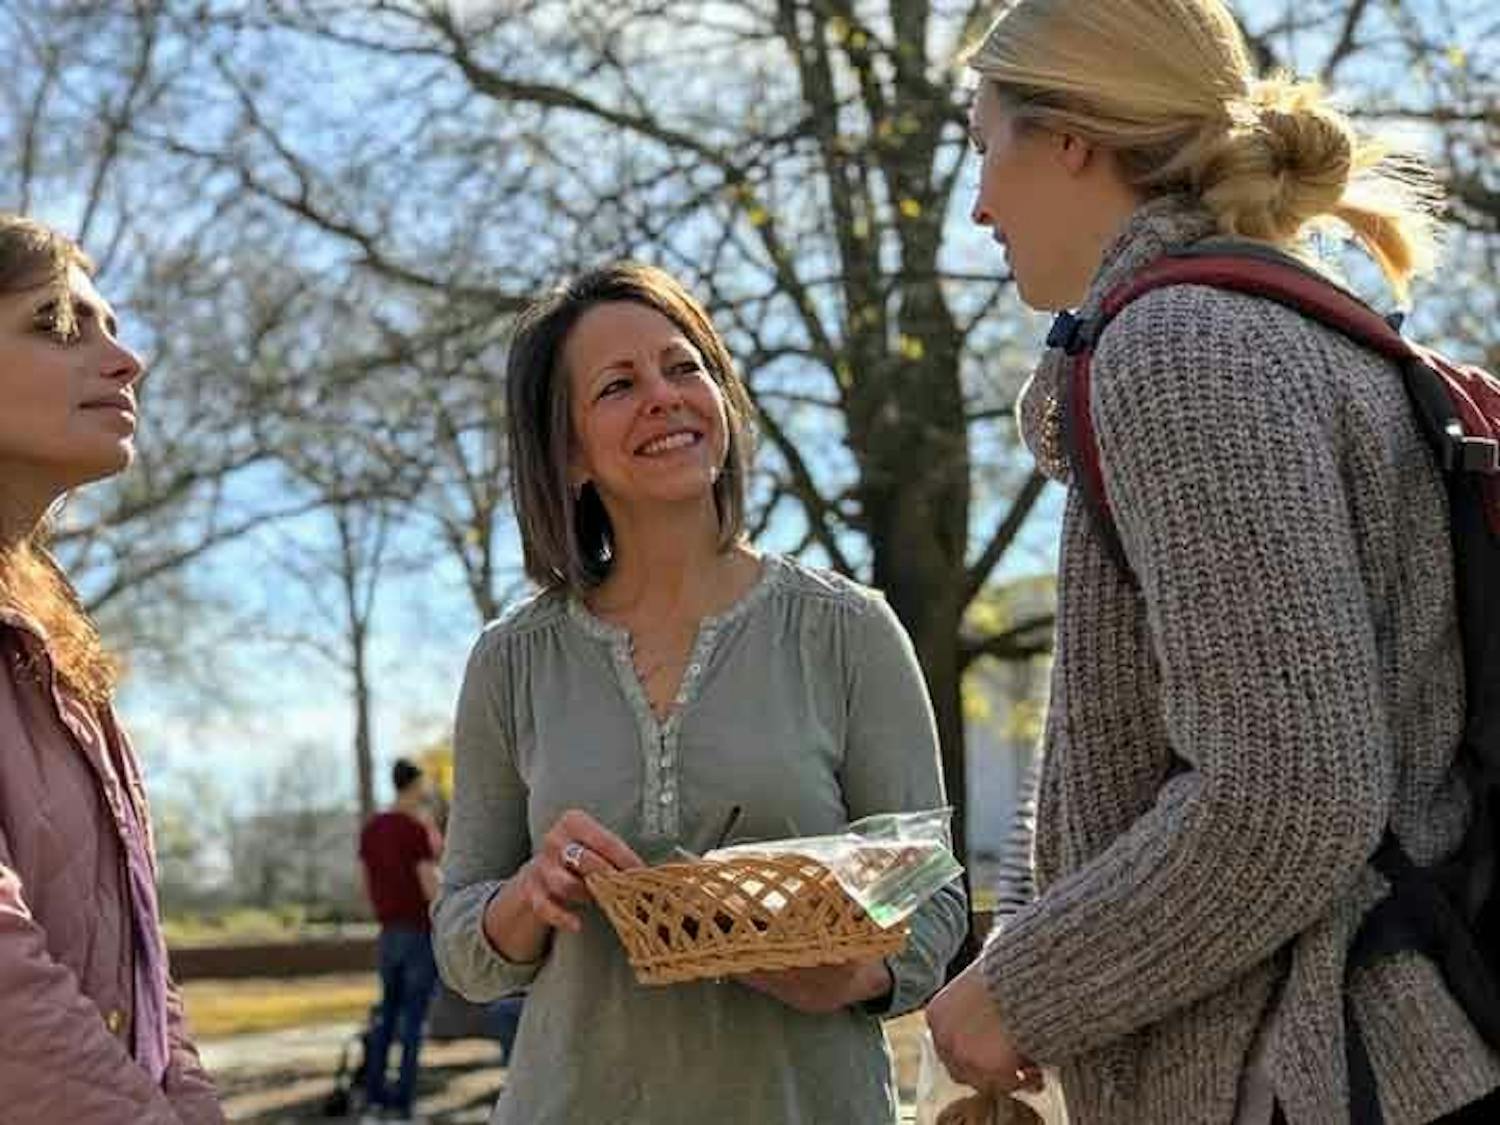 A student talks to an Ask a Mom member who holds a basket of cookies while in the clapping circle near Davis Field.